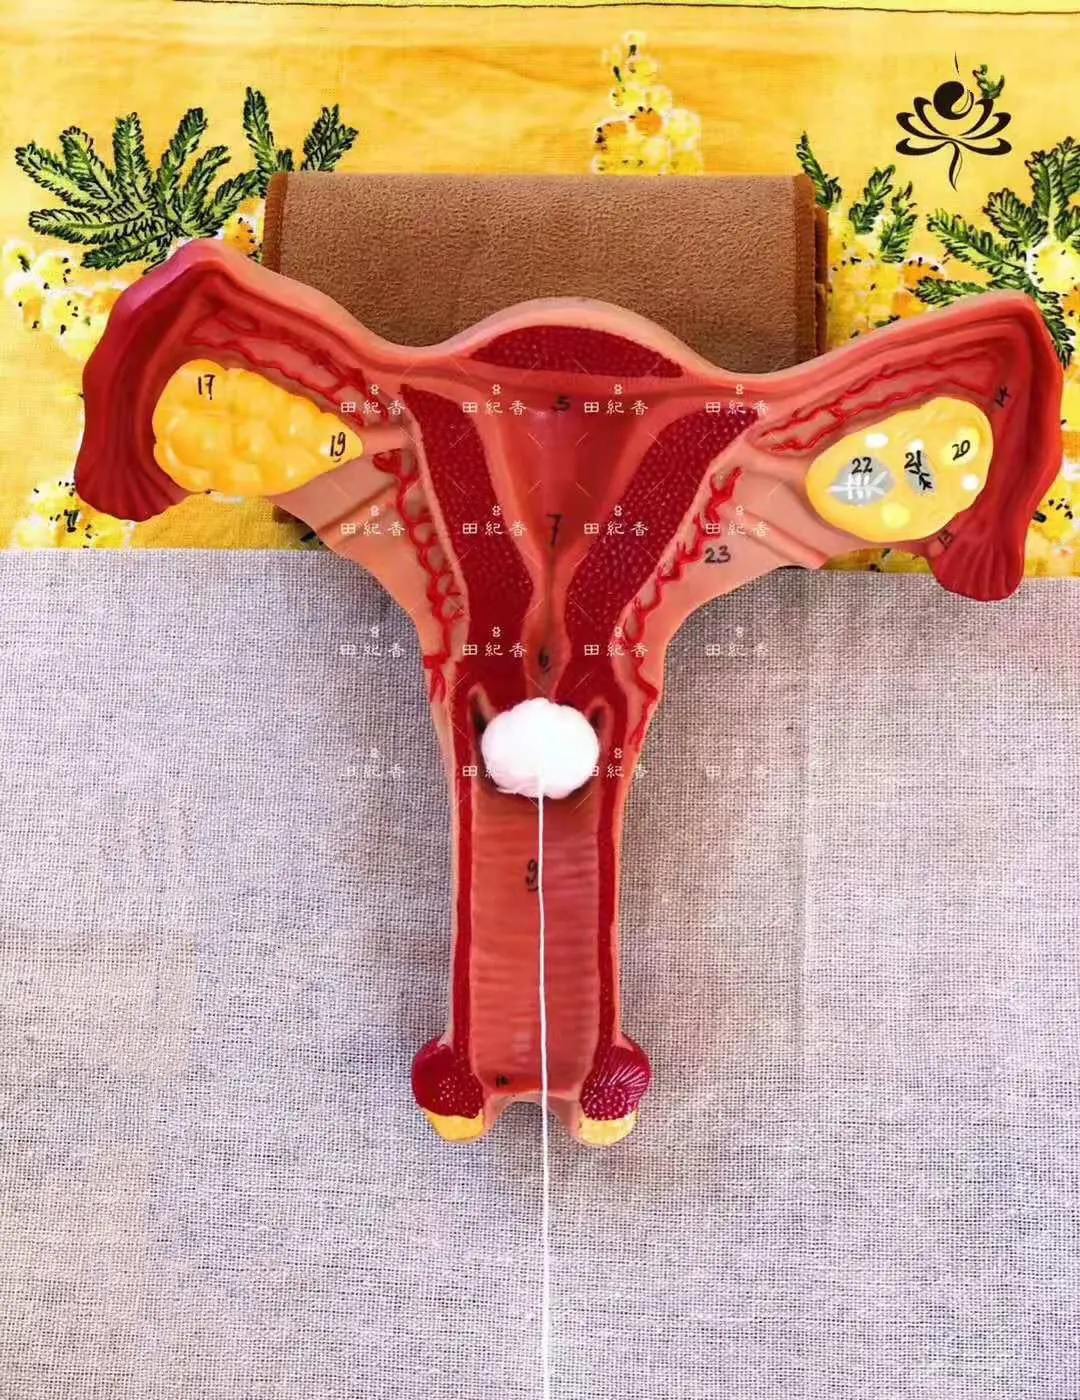 Gynecological Supplies To Regulate Uterine Fibroids To Treat Women's Infertility And Dredge The Fallopian Tube